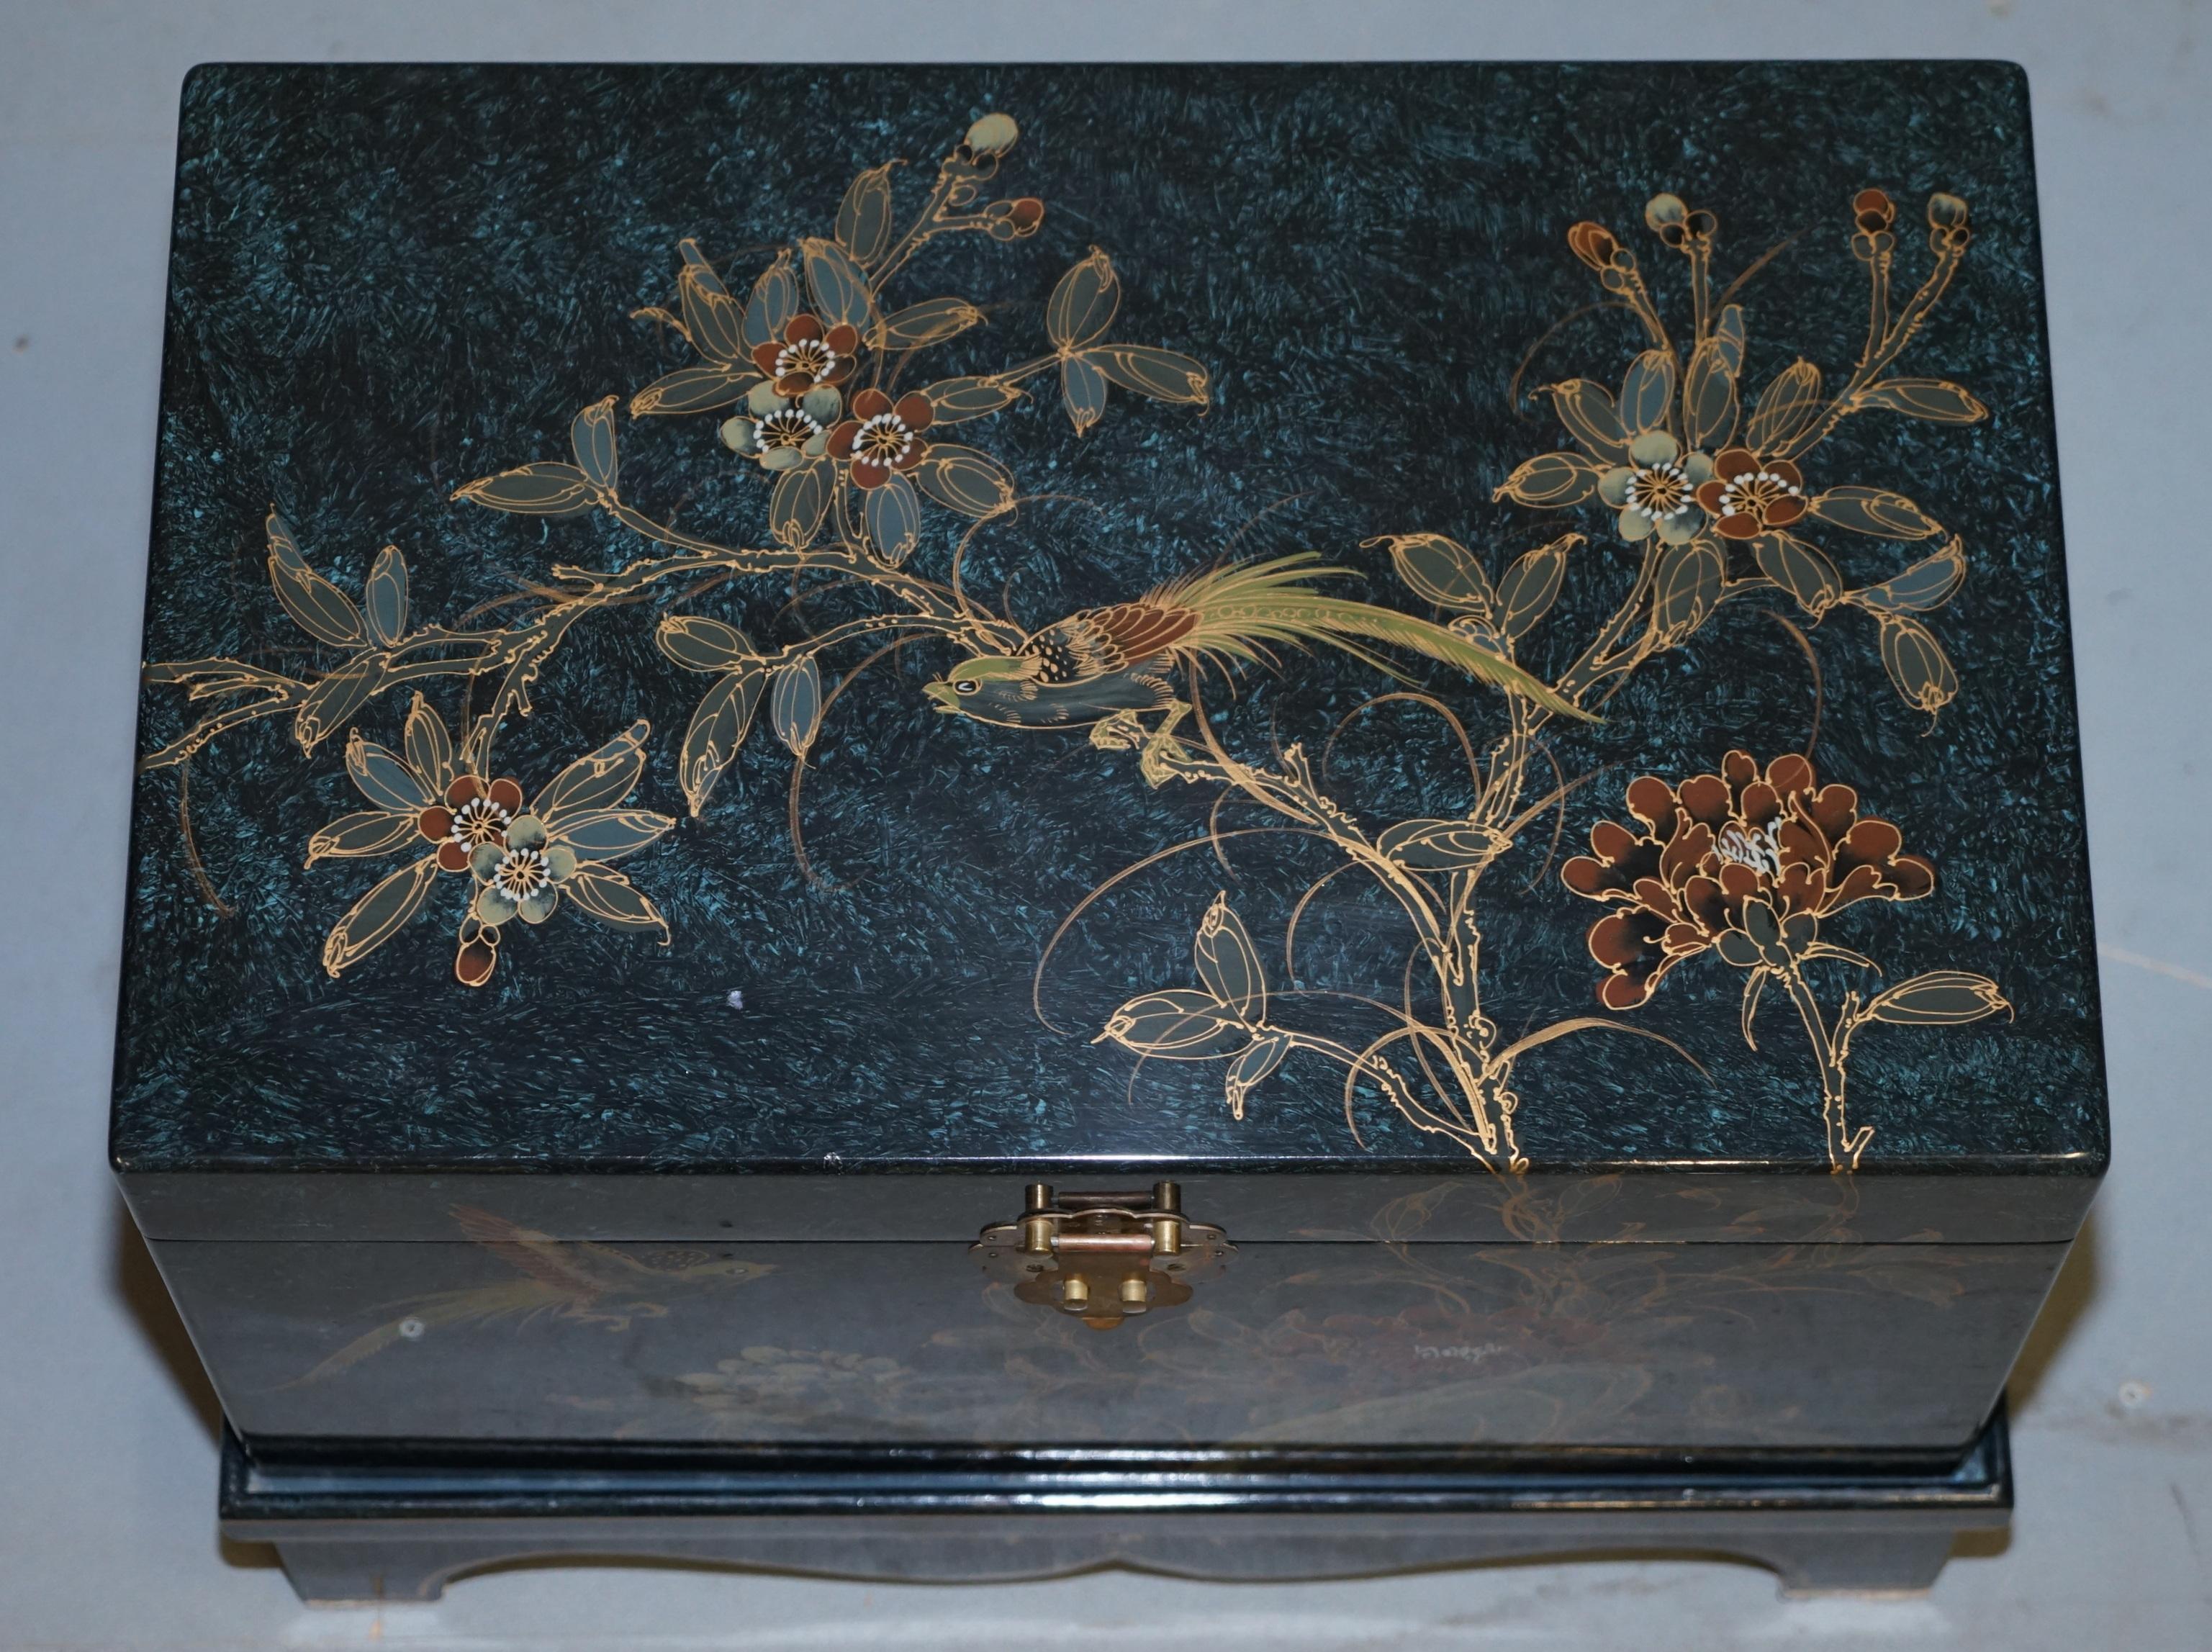 Wood Lovely Decorative Chinese Chinoiserie Style Painted Trunk or Blanket Chest Box